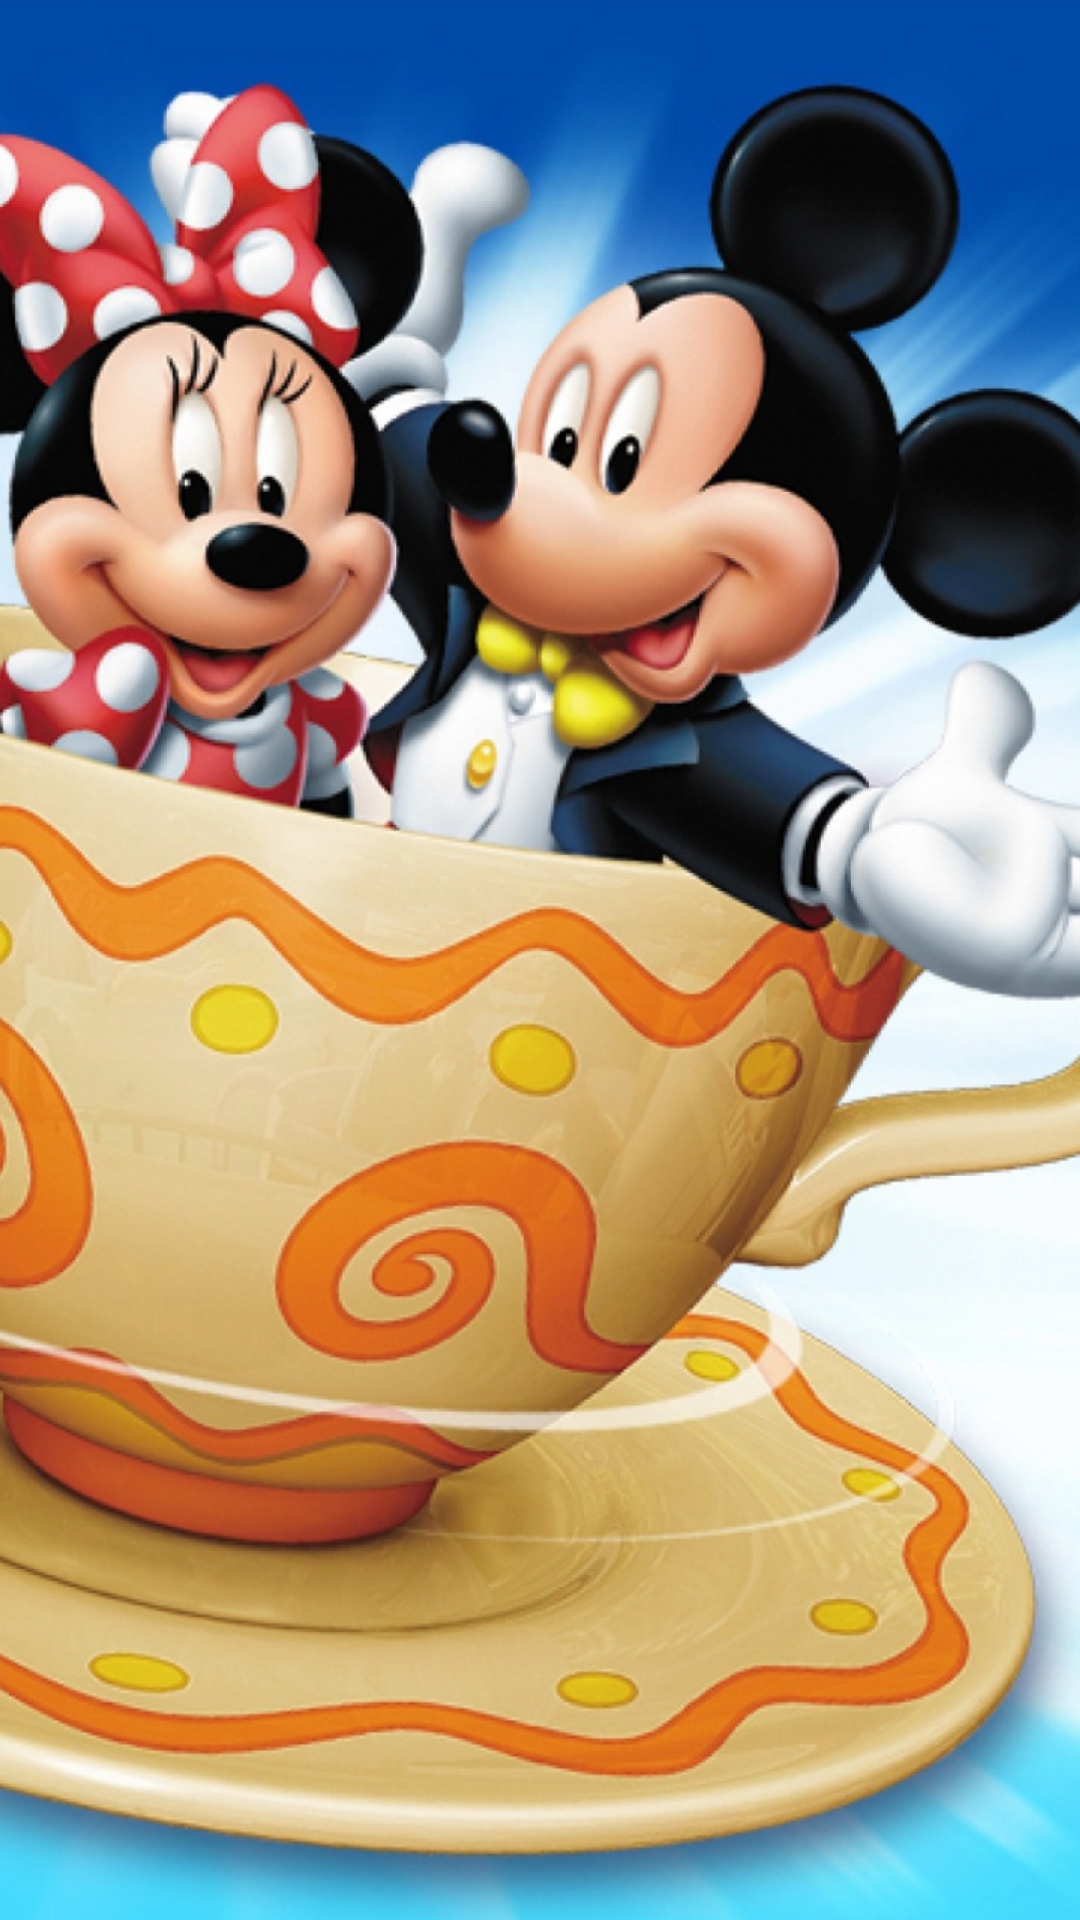 Mickey And Minnie Mouse In Cup screenshot #1 1080x1920